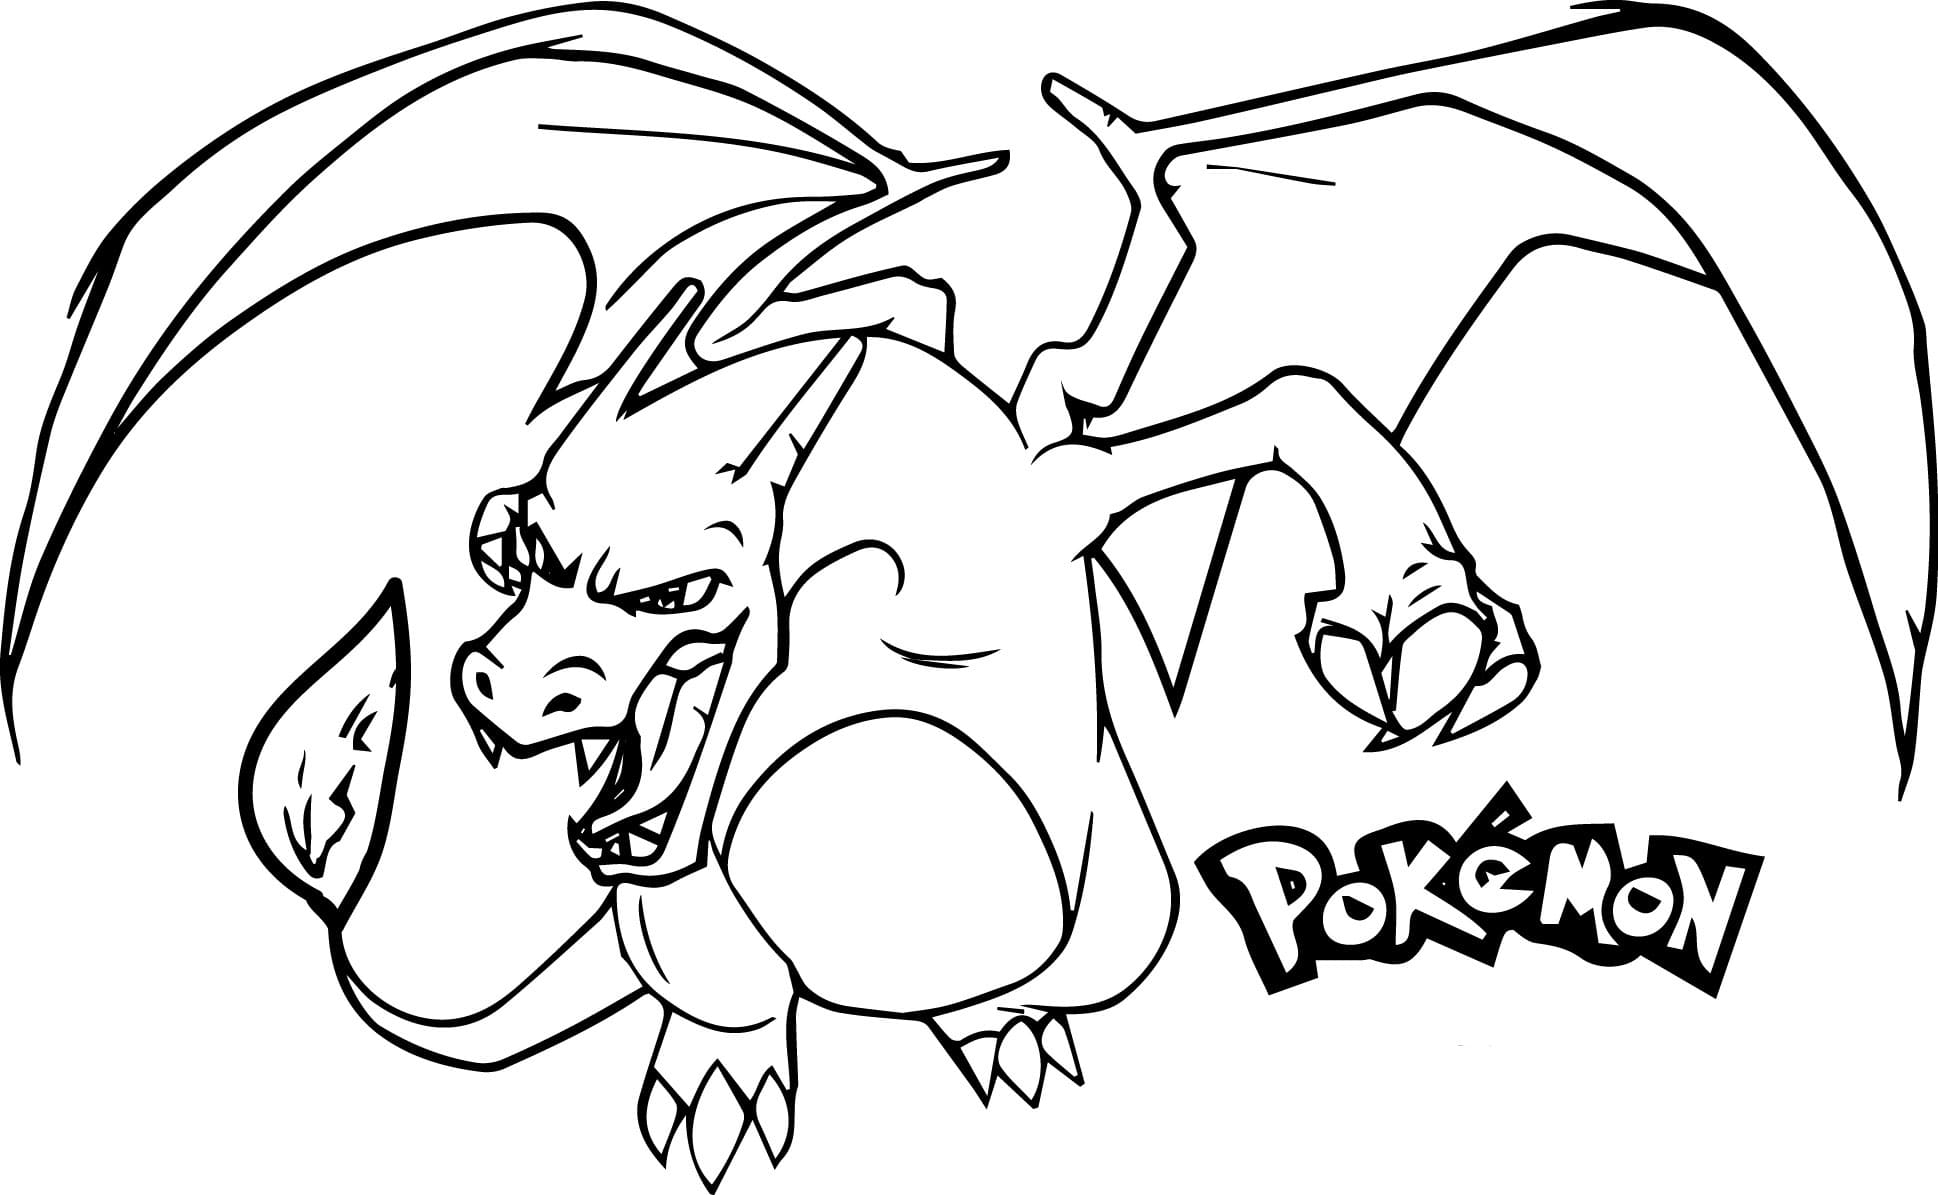 Charizard Coloring pages. Print for free WONDER DAY